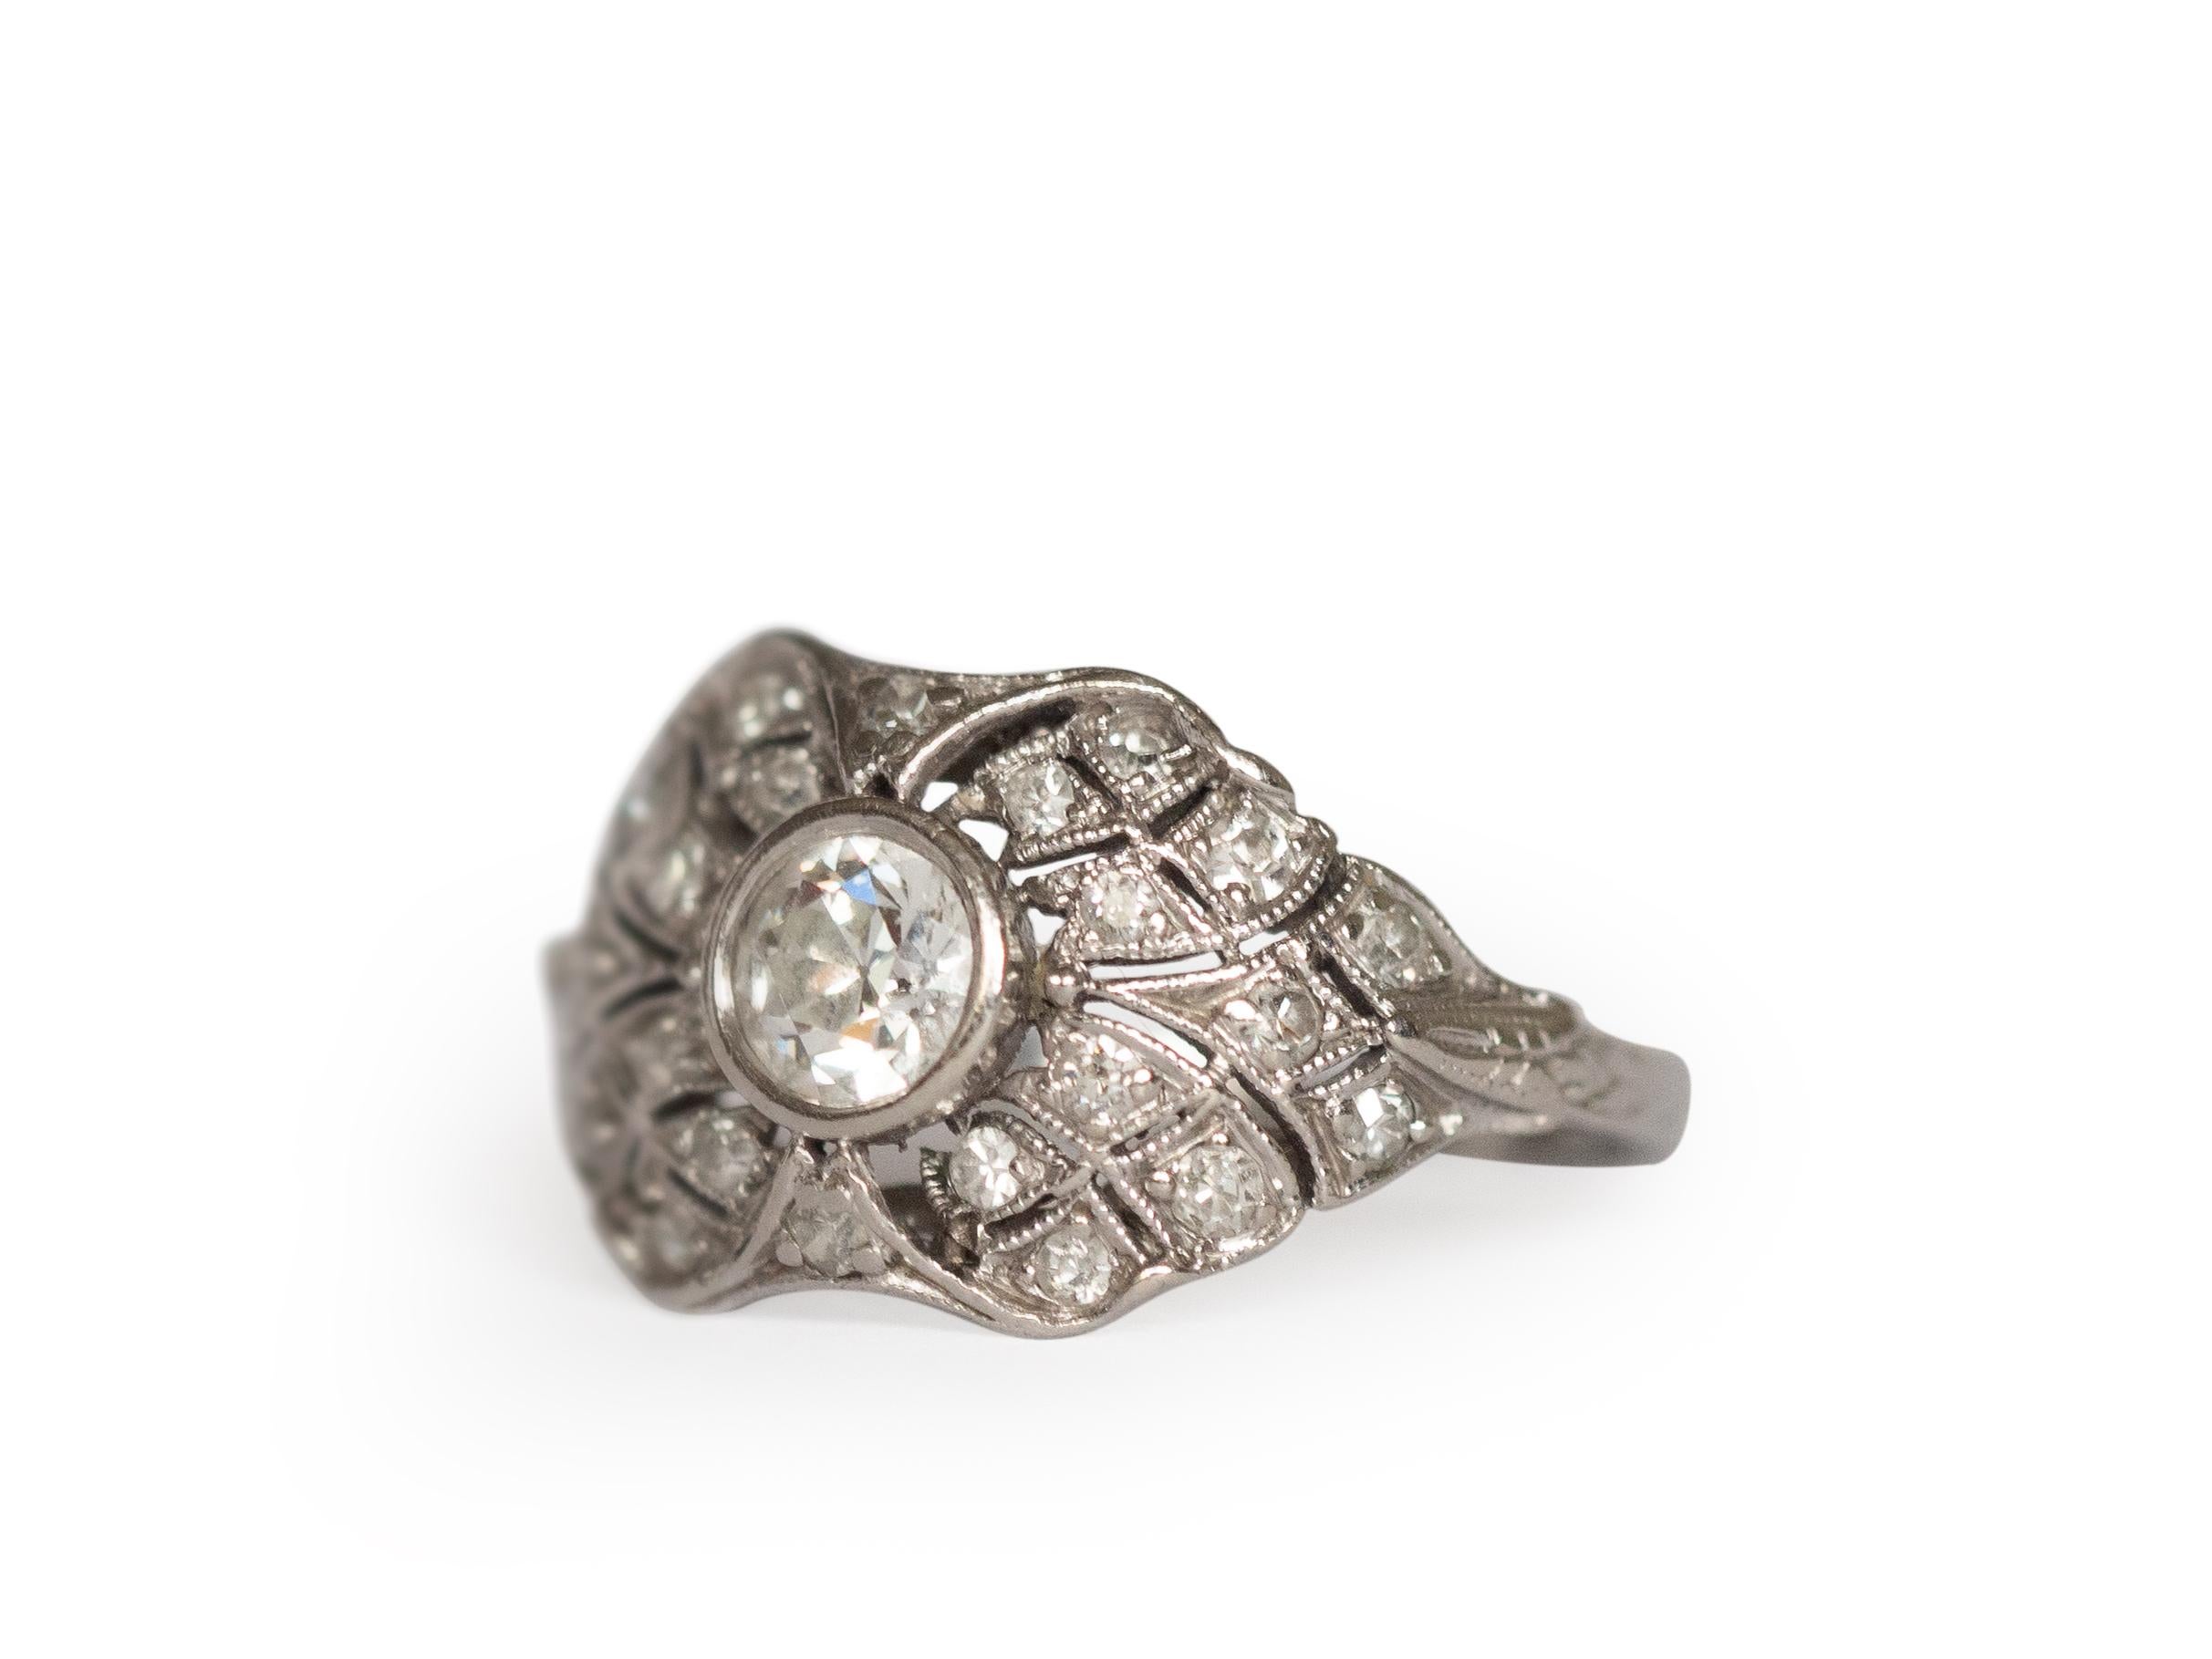 Ring Size: 4.75
Metal Type: Platinum  [Hallmarked, and Tested]
Weight:  4 grams

Diamond Details:
Weight: .50 carat, total weight
Cut: Old European Brilliant
Color: H
Clarity: VS

Finger to Top of Stone Measurement: 5mm
Condition:  Excellent
